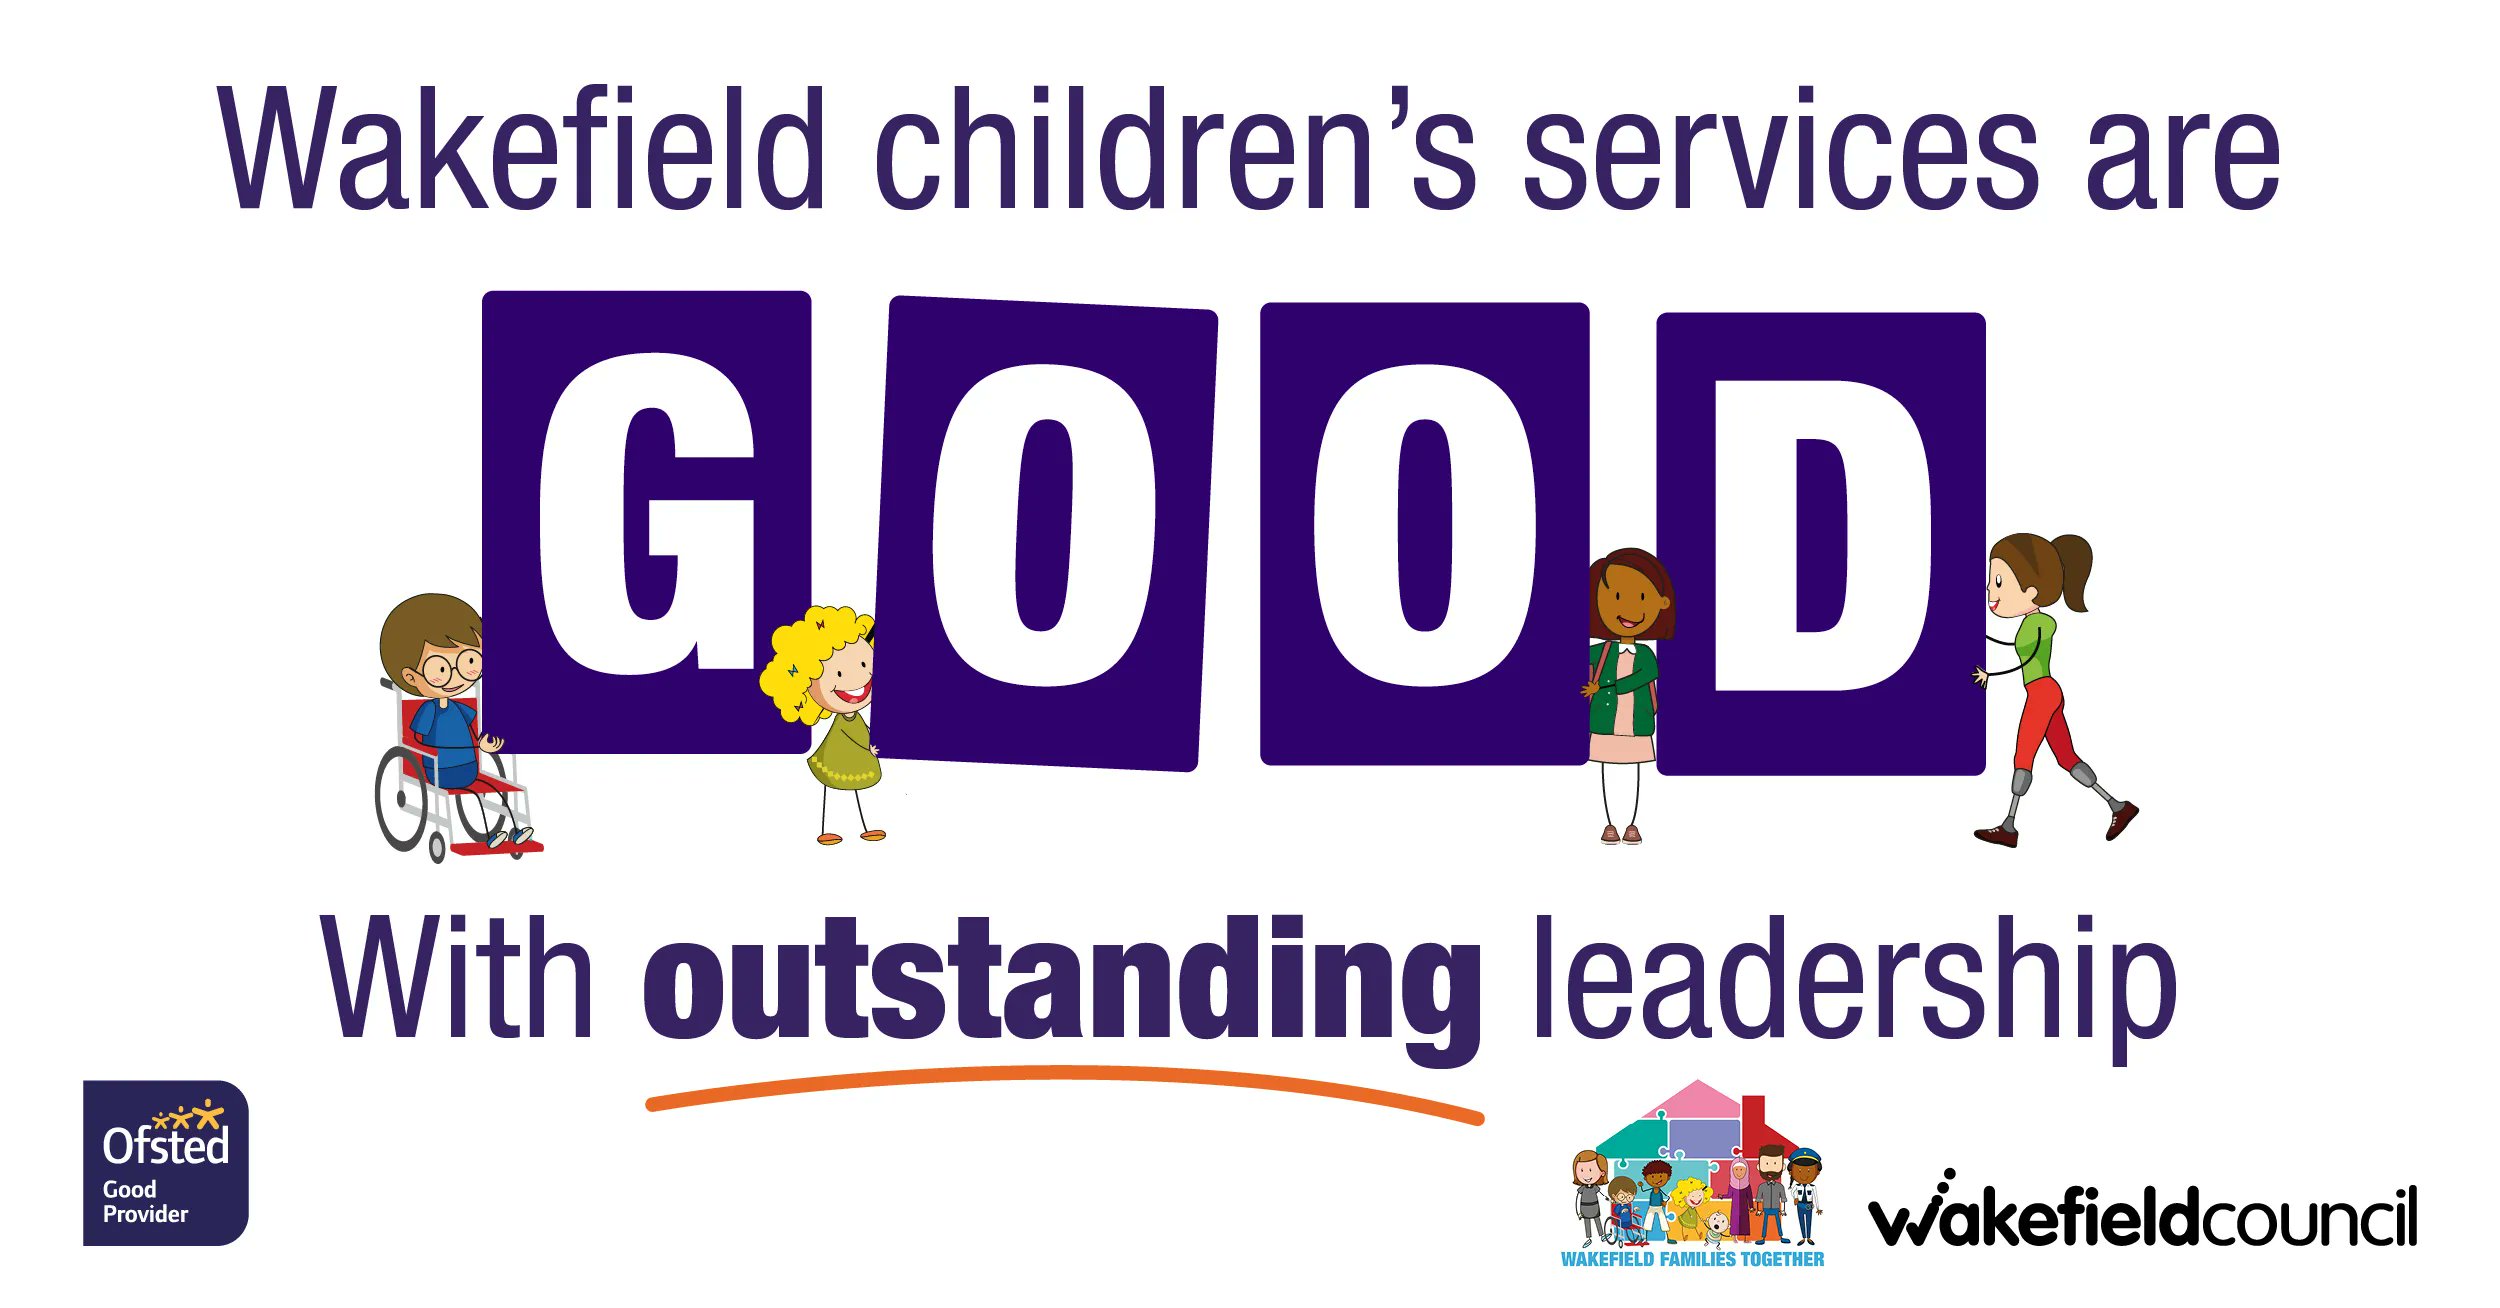 Wakefield Council on Twitter: "Ofsted inspectors have confirmed that ' outstanding' leadership has transformed Wakefield Council's children's services in just three years to 'GOOD' 💫. Read more highlights from their findings at https://t.co/yeHpQfbgEs